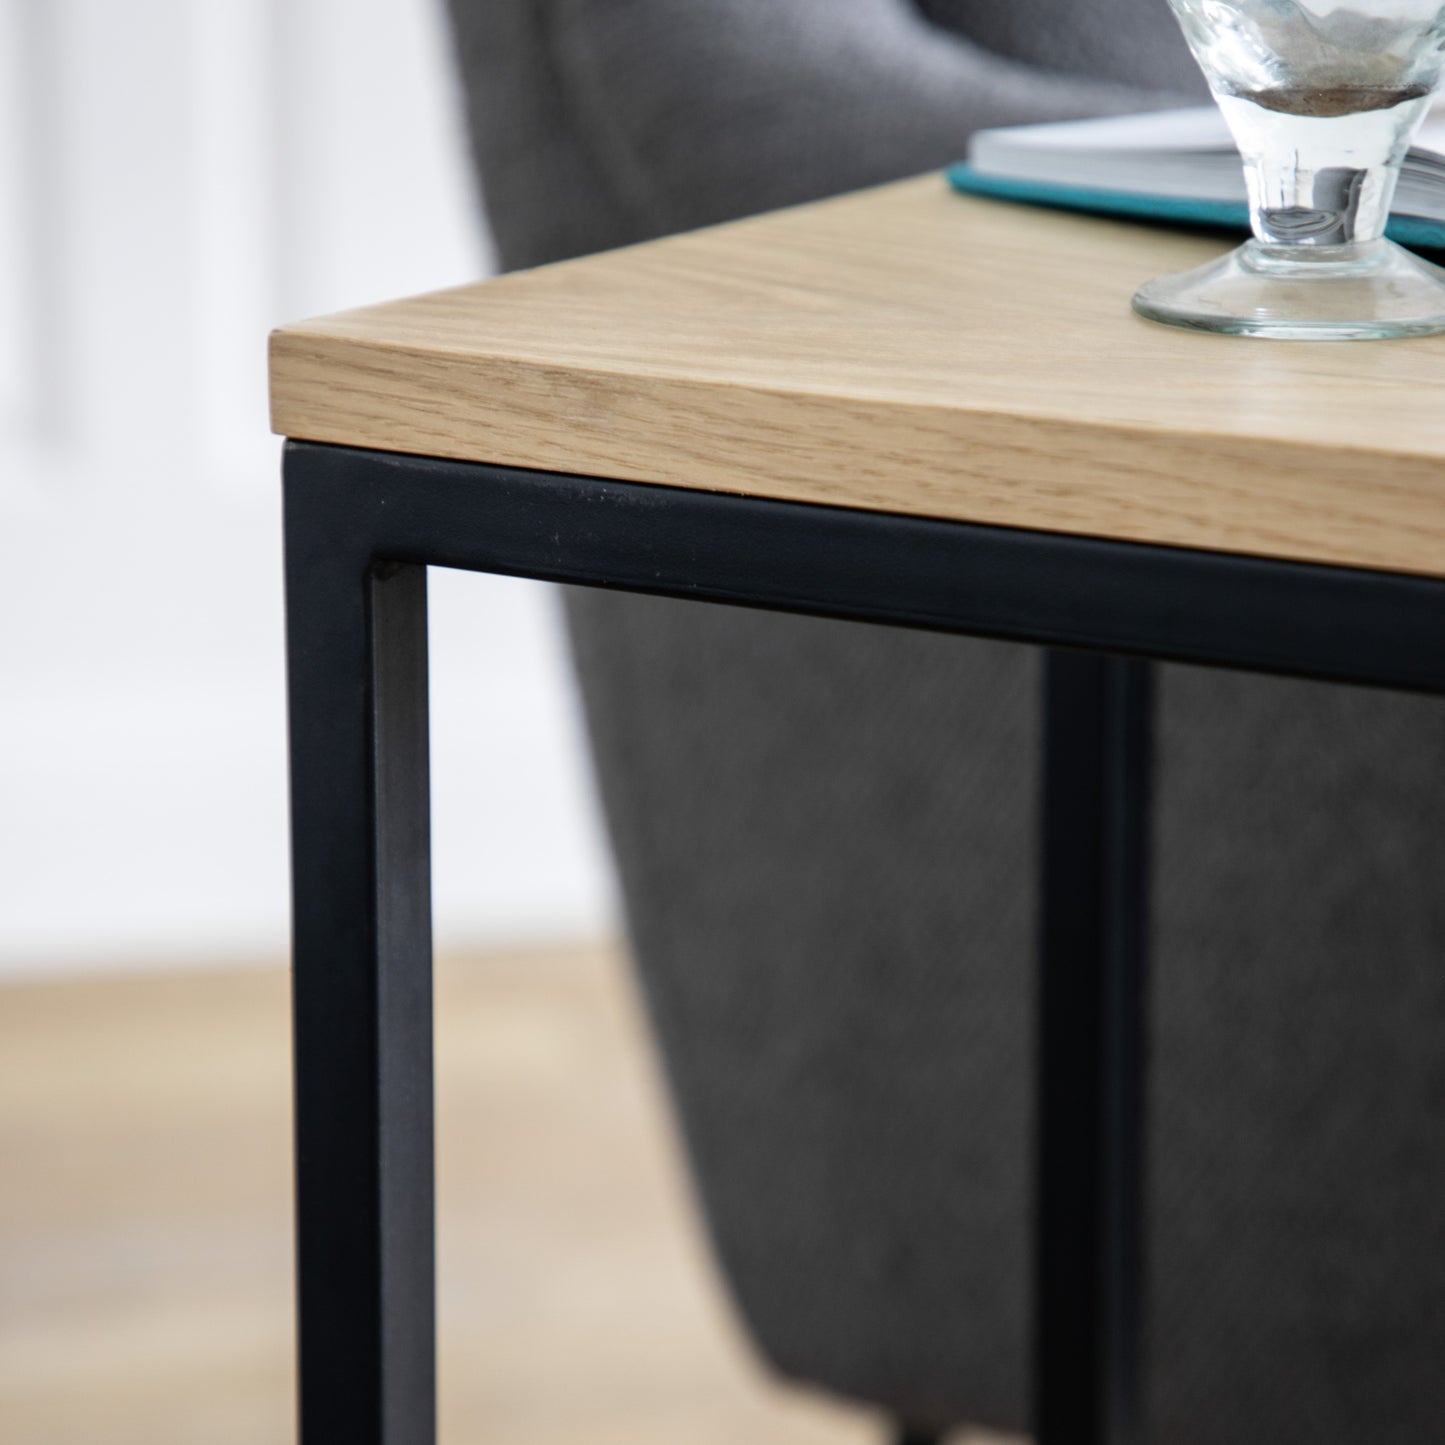 A Staverton Supper C Table 300x400x600mm by Kikiathome.co.uk, perfect for home furniture and interior decor, features a glass top.